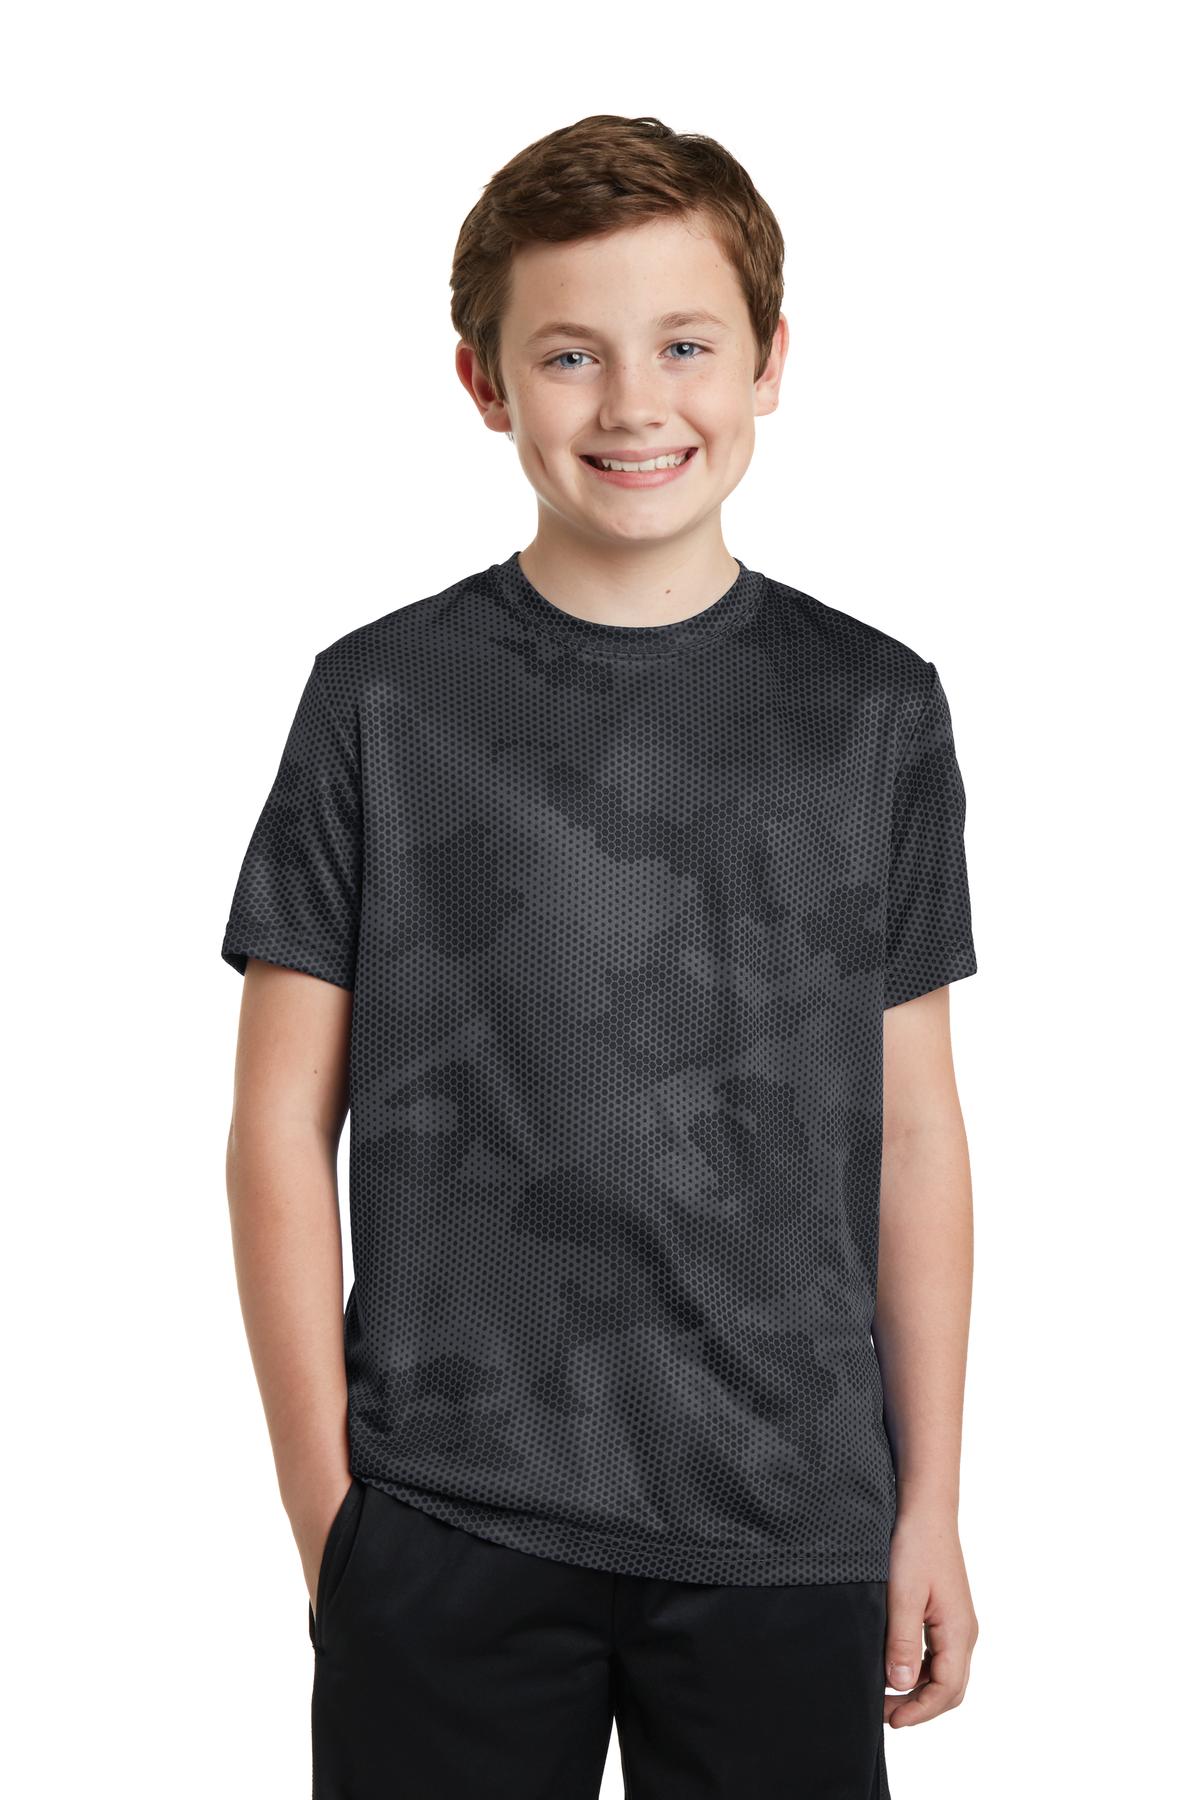 Sport-Tek Activewear Youth T-Shirts for Hospitality ® Youth CamoHex Tee.-Sport-Tek